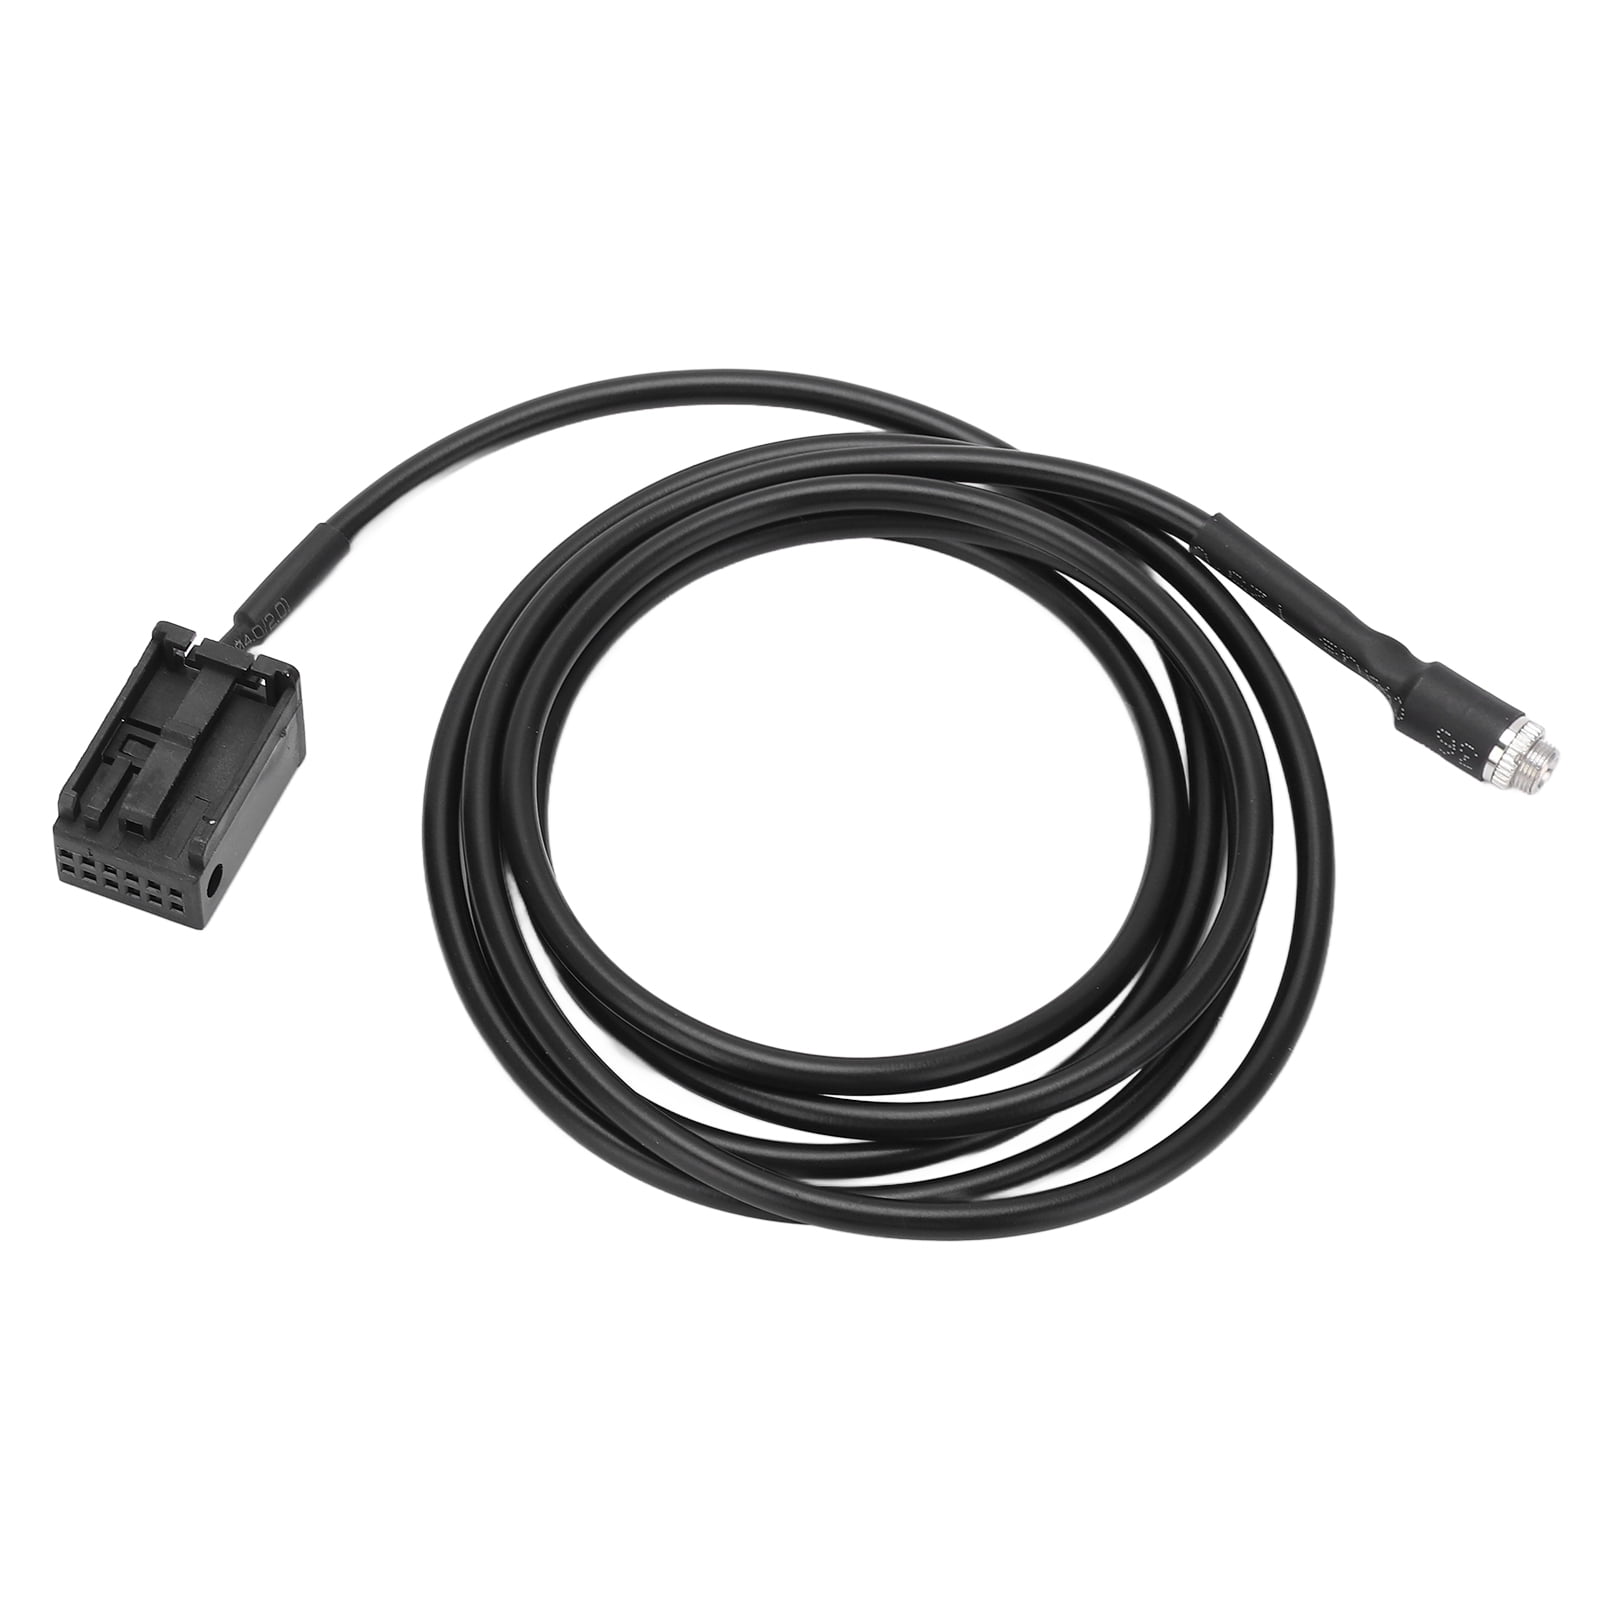 4-pin Garmin 6ft Power Cable for echo Series Fishfinder  010-11678-10 